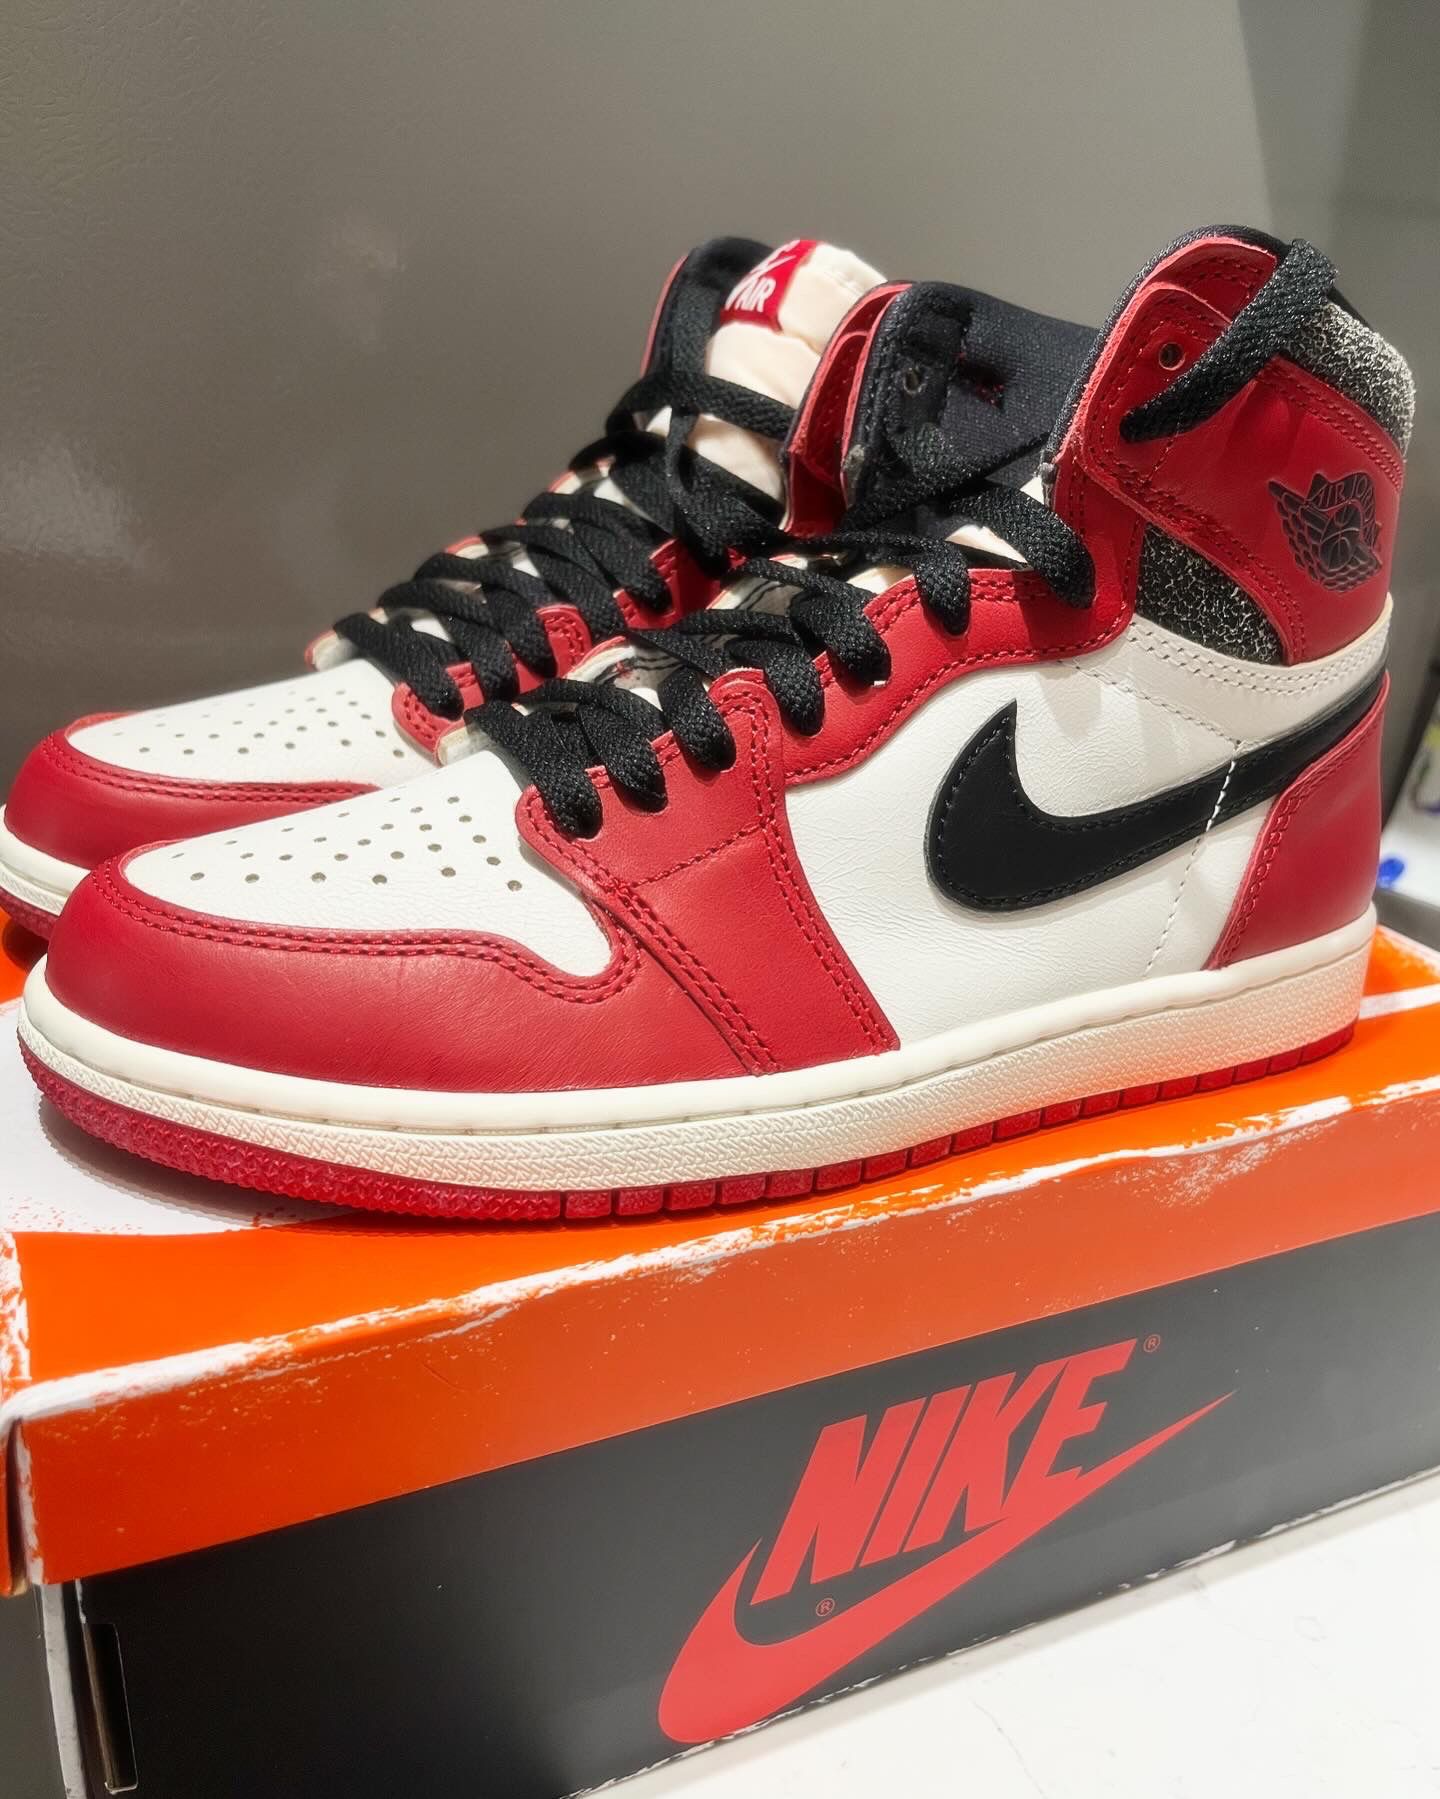 Jordan 1 Lost and found 